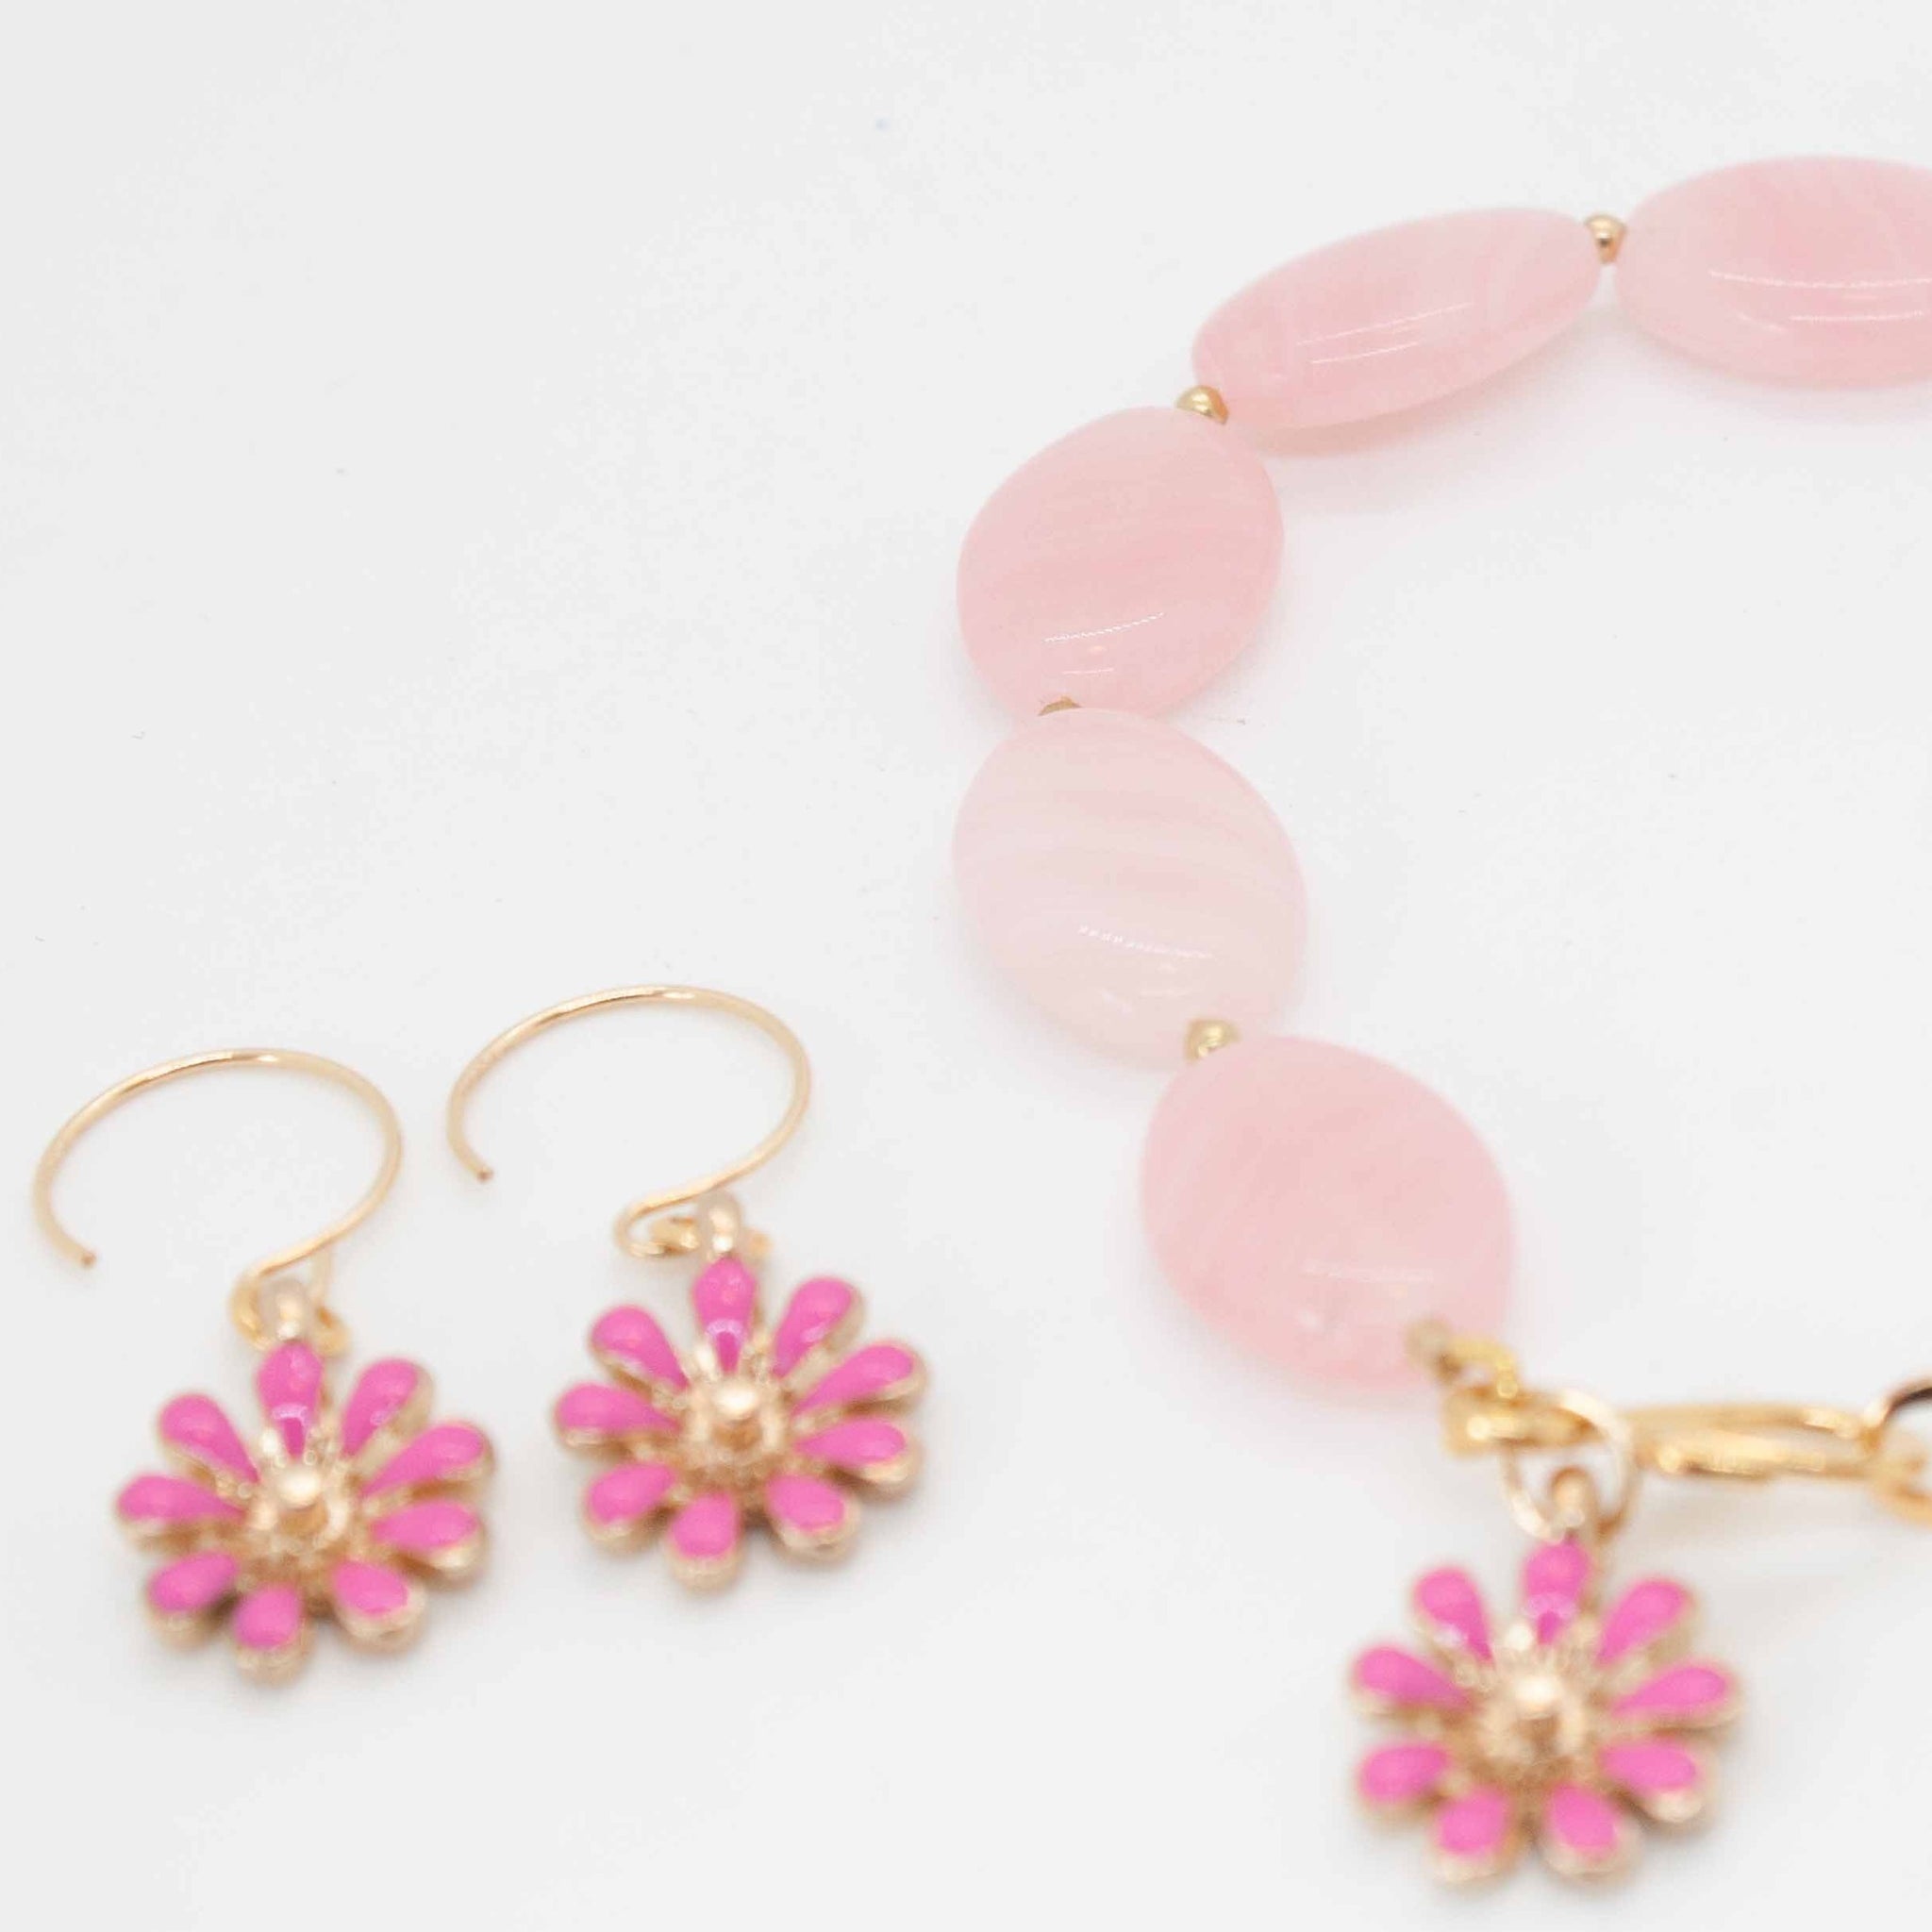 Wear spring on your wrist and ears with these delightful traditional Czech glass beads and matching daisy charms!  7 1/4 inch Czech glass beaded bracelet and gold filled earrings with blushing pink daisy enamel charms. Handmade in Toronto by kp jewelry co.